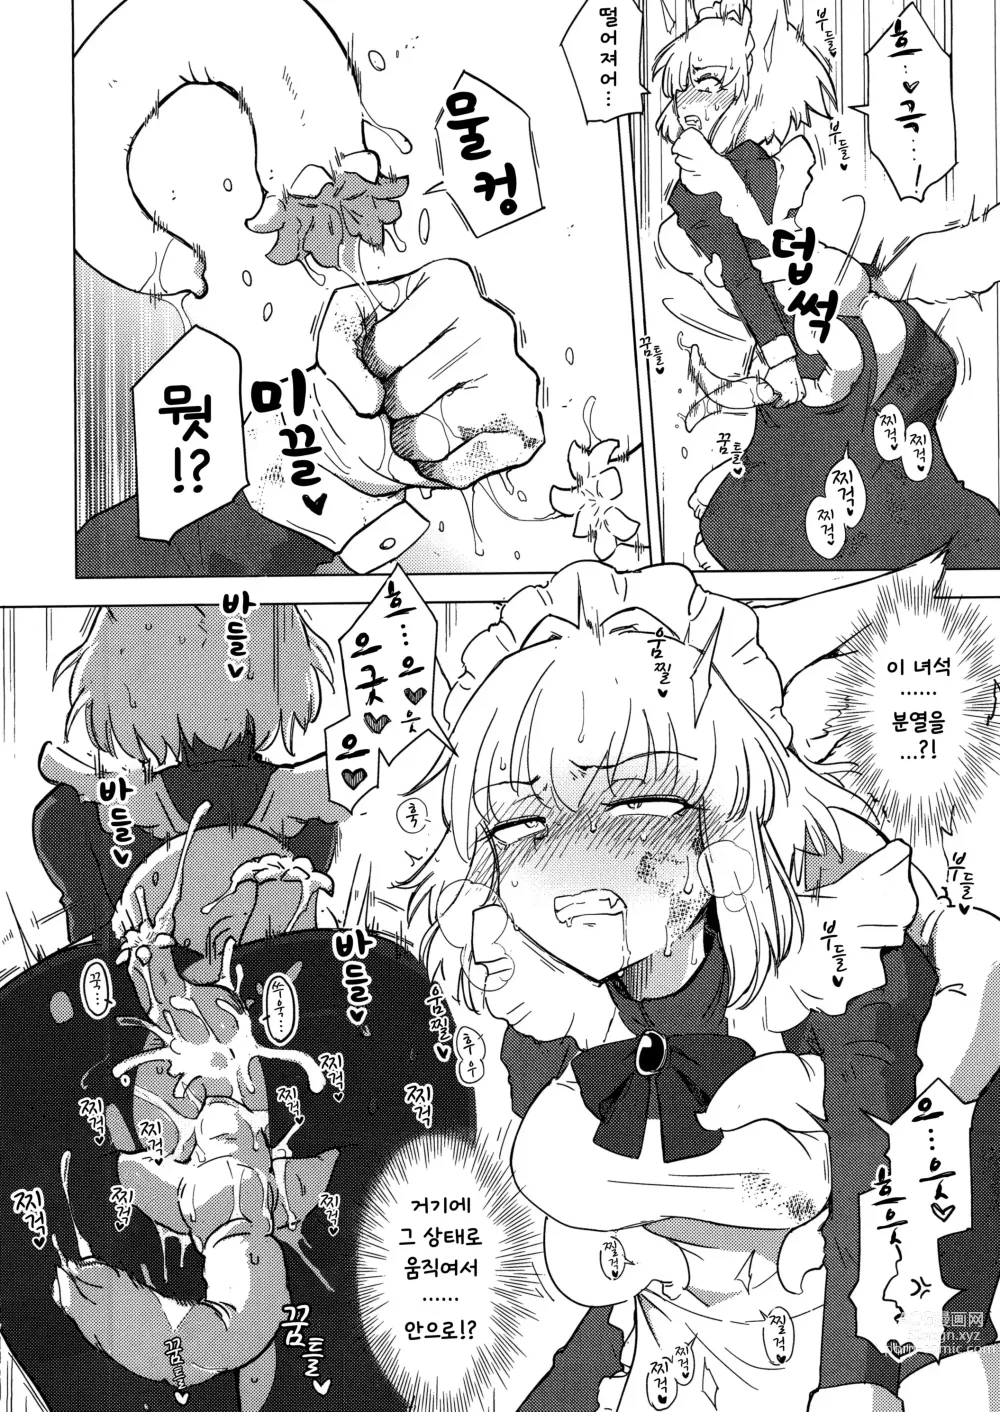 Page 21 of doujinshi Wolf in sheeps clothing in Tentacles